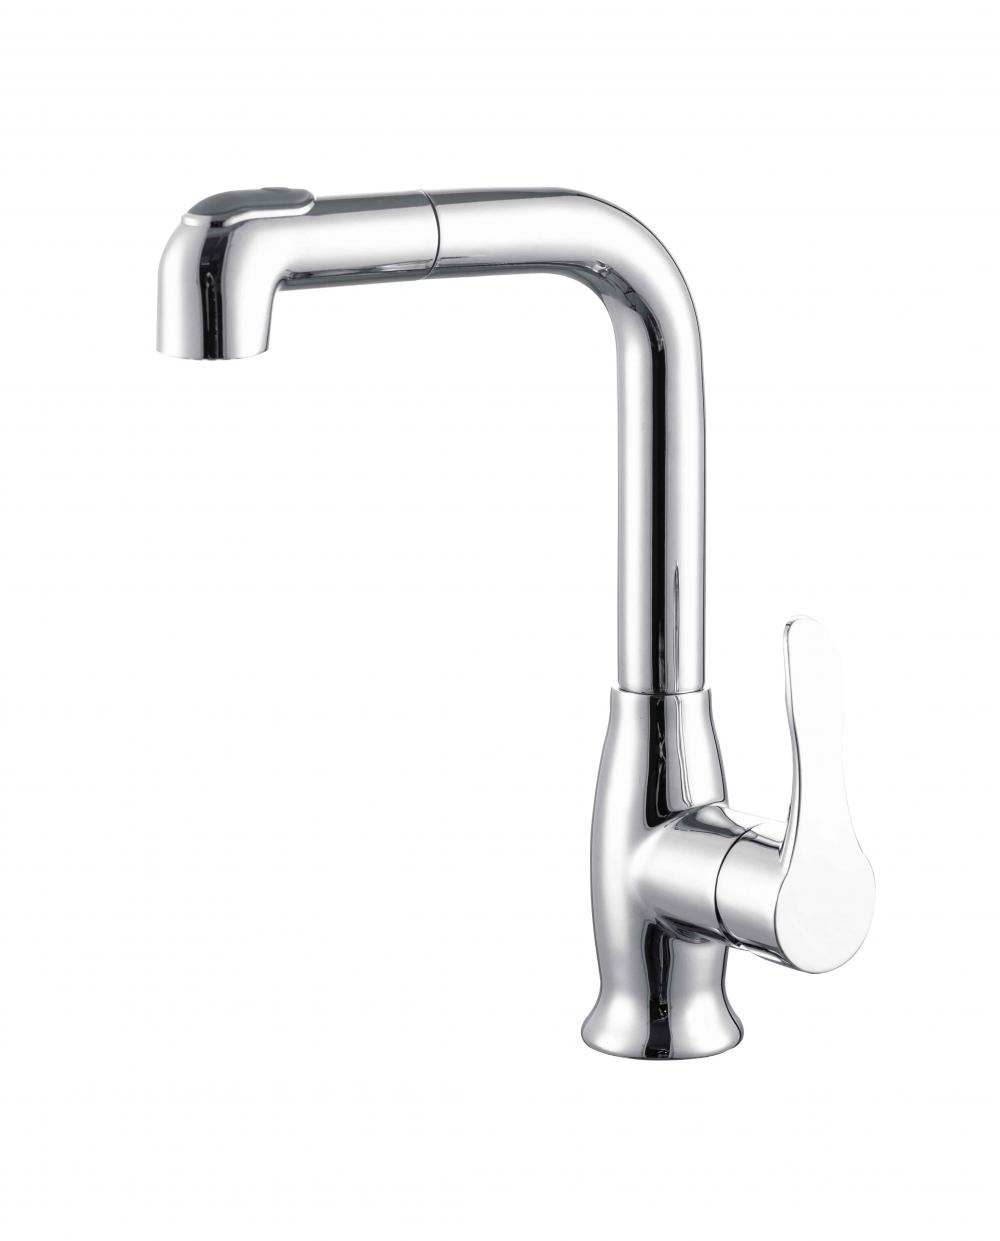 Lift Single handle Brass Pull Out Basin faucet